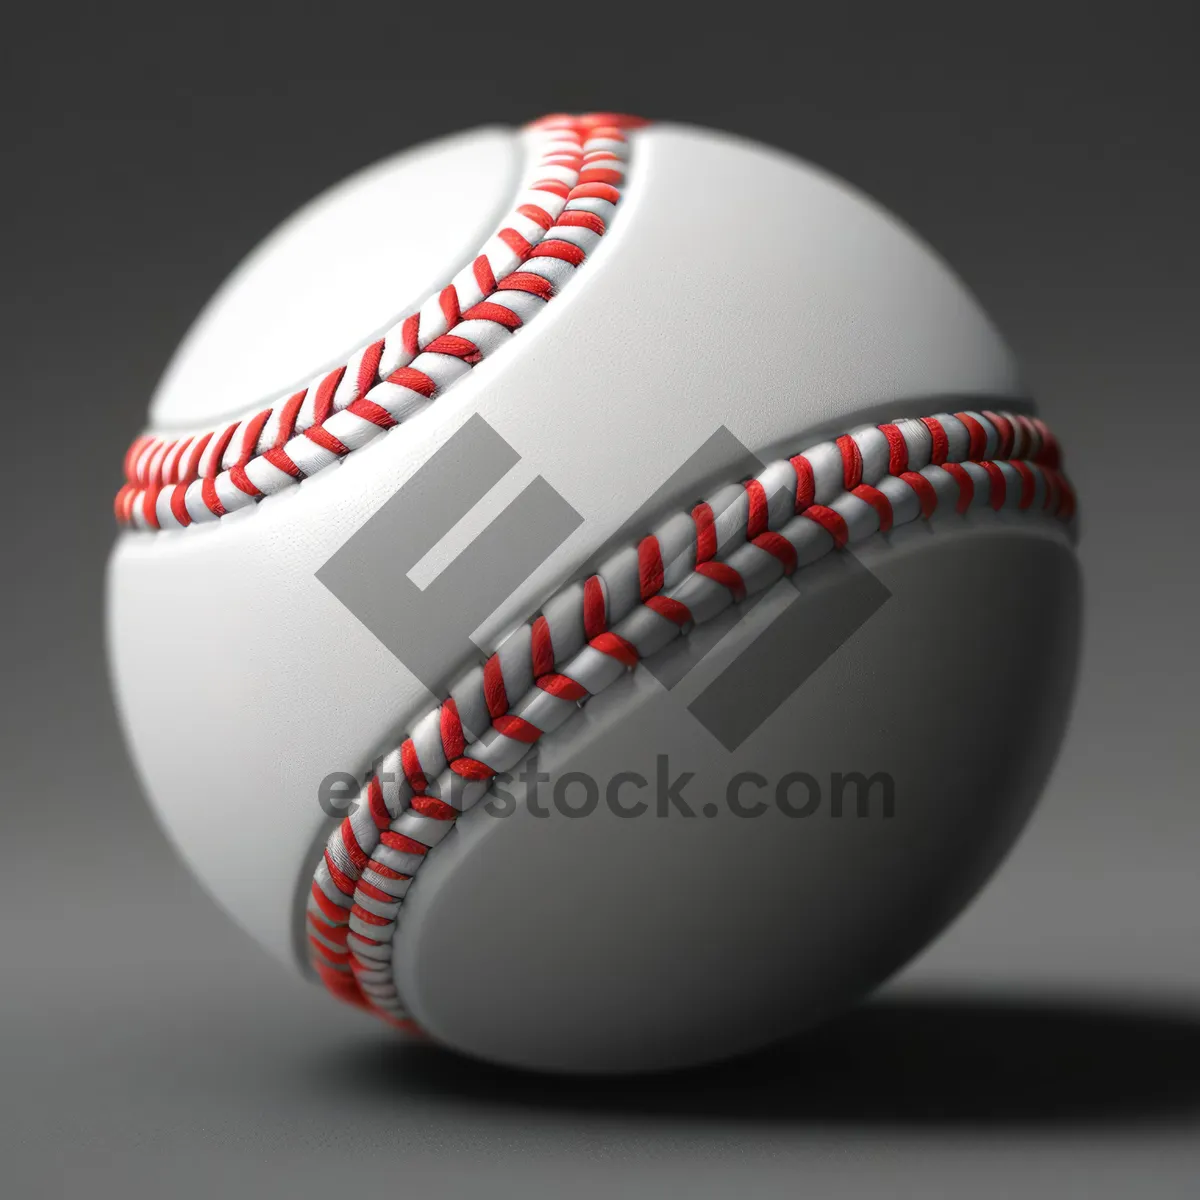 Picture of Baseball Game Equipment: Iconic Sporting Sphere and Gear